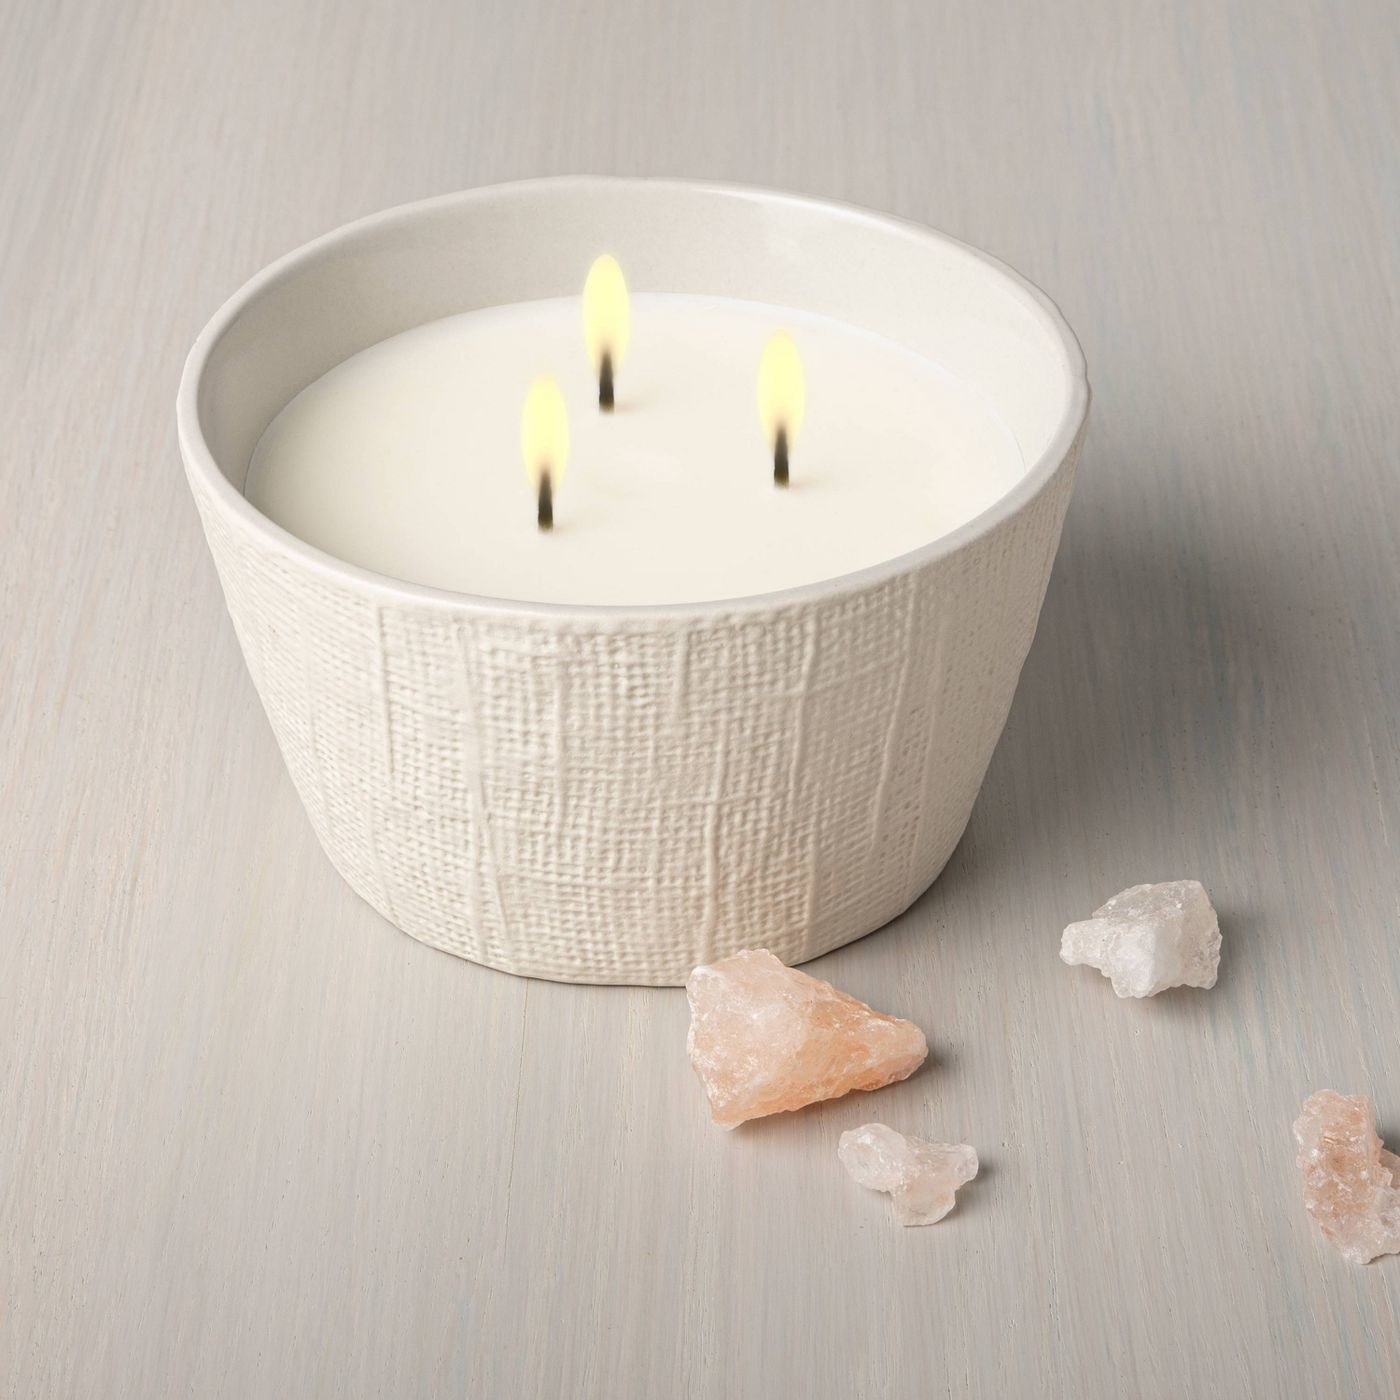 A large 3 wick candle in textured ceramic holder